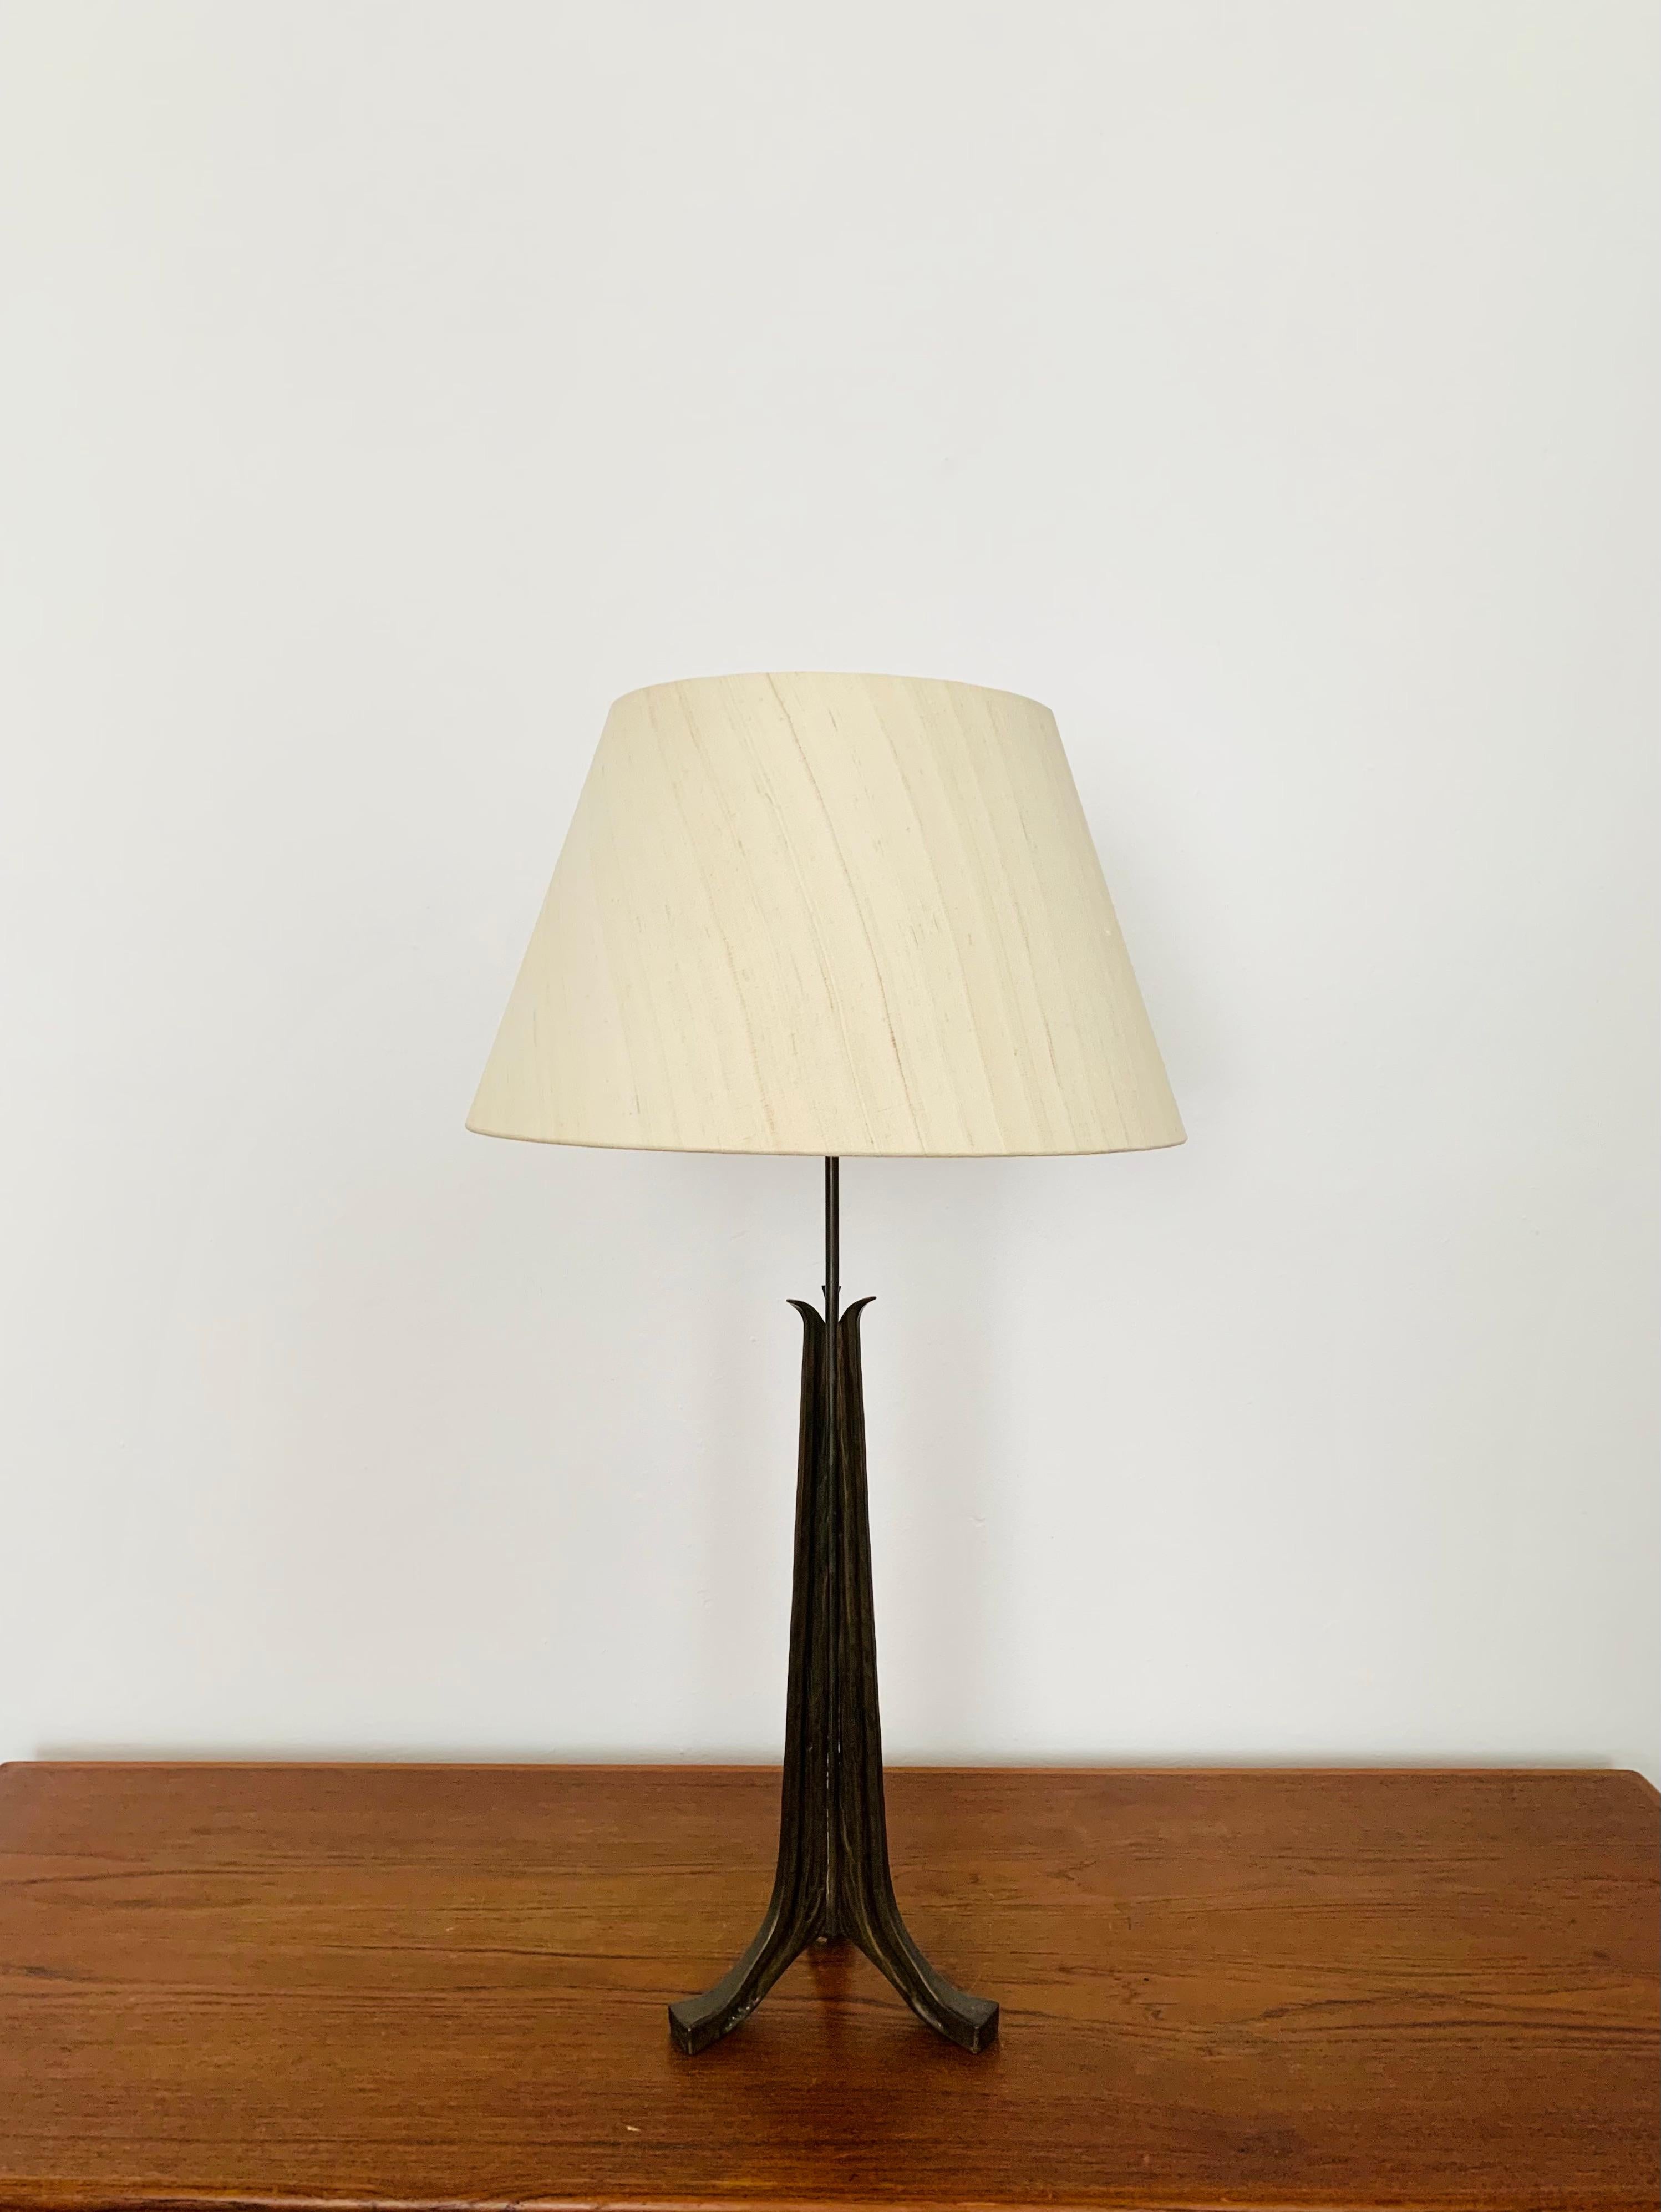 Impressive beautiful brutalist table lamp from the 1960s.
The lamp has a very high quality finish.
Wonderful design and an asset to any home.
A very noble light is created.

Sockets with pull switch are and switch on cord.

Condition:

Very